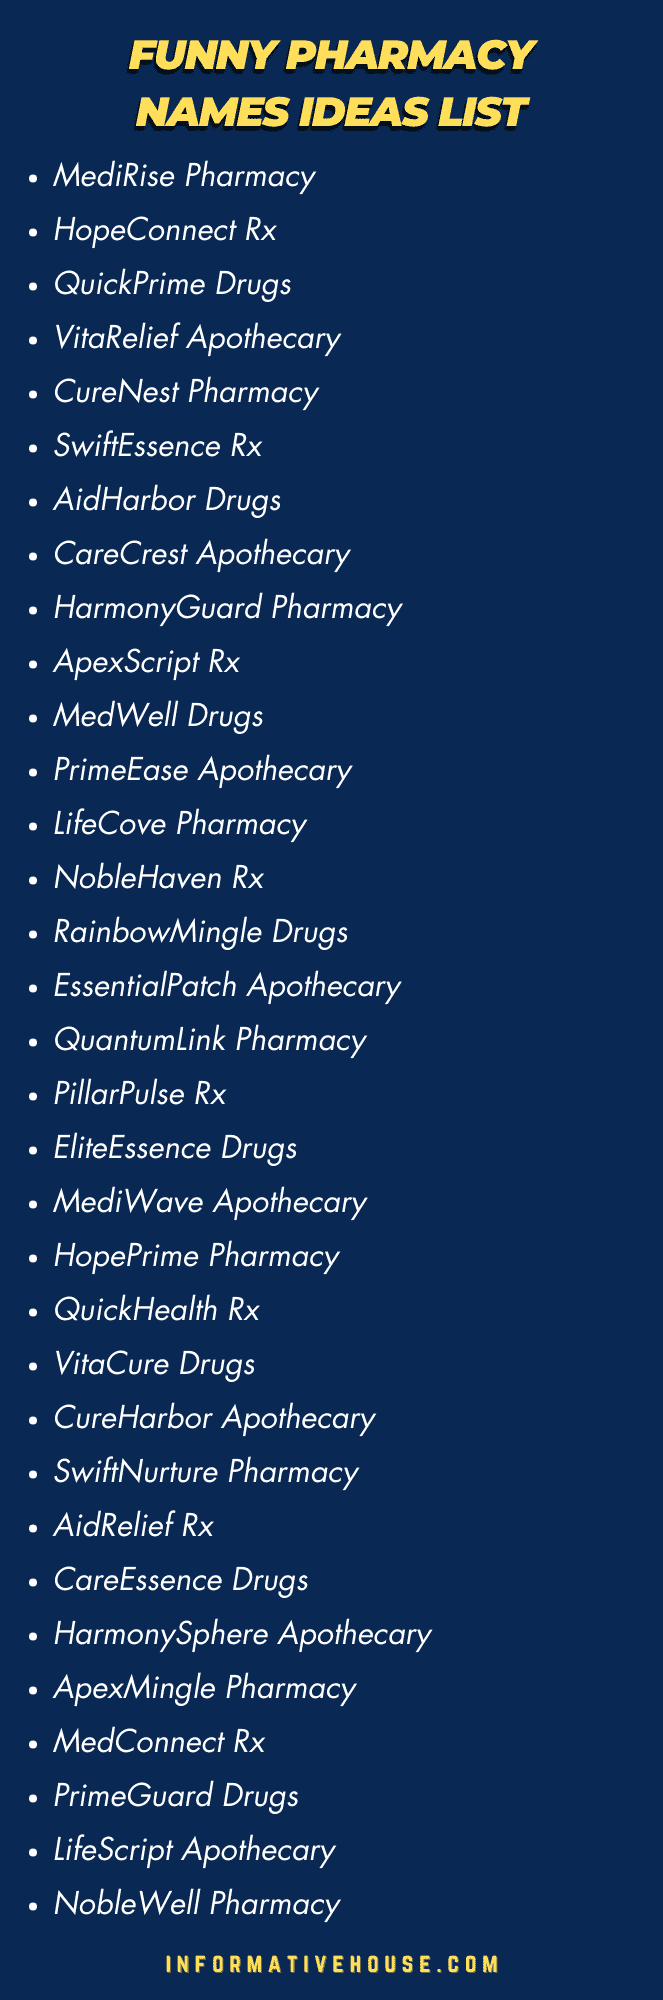 Top 50 Funny Pharmacy Names Ideas List for startup